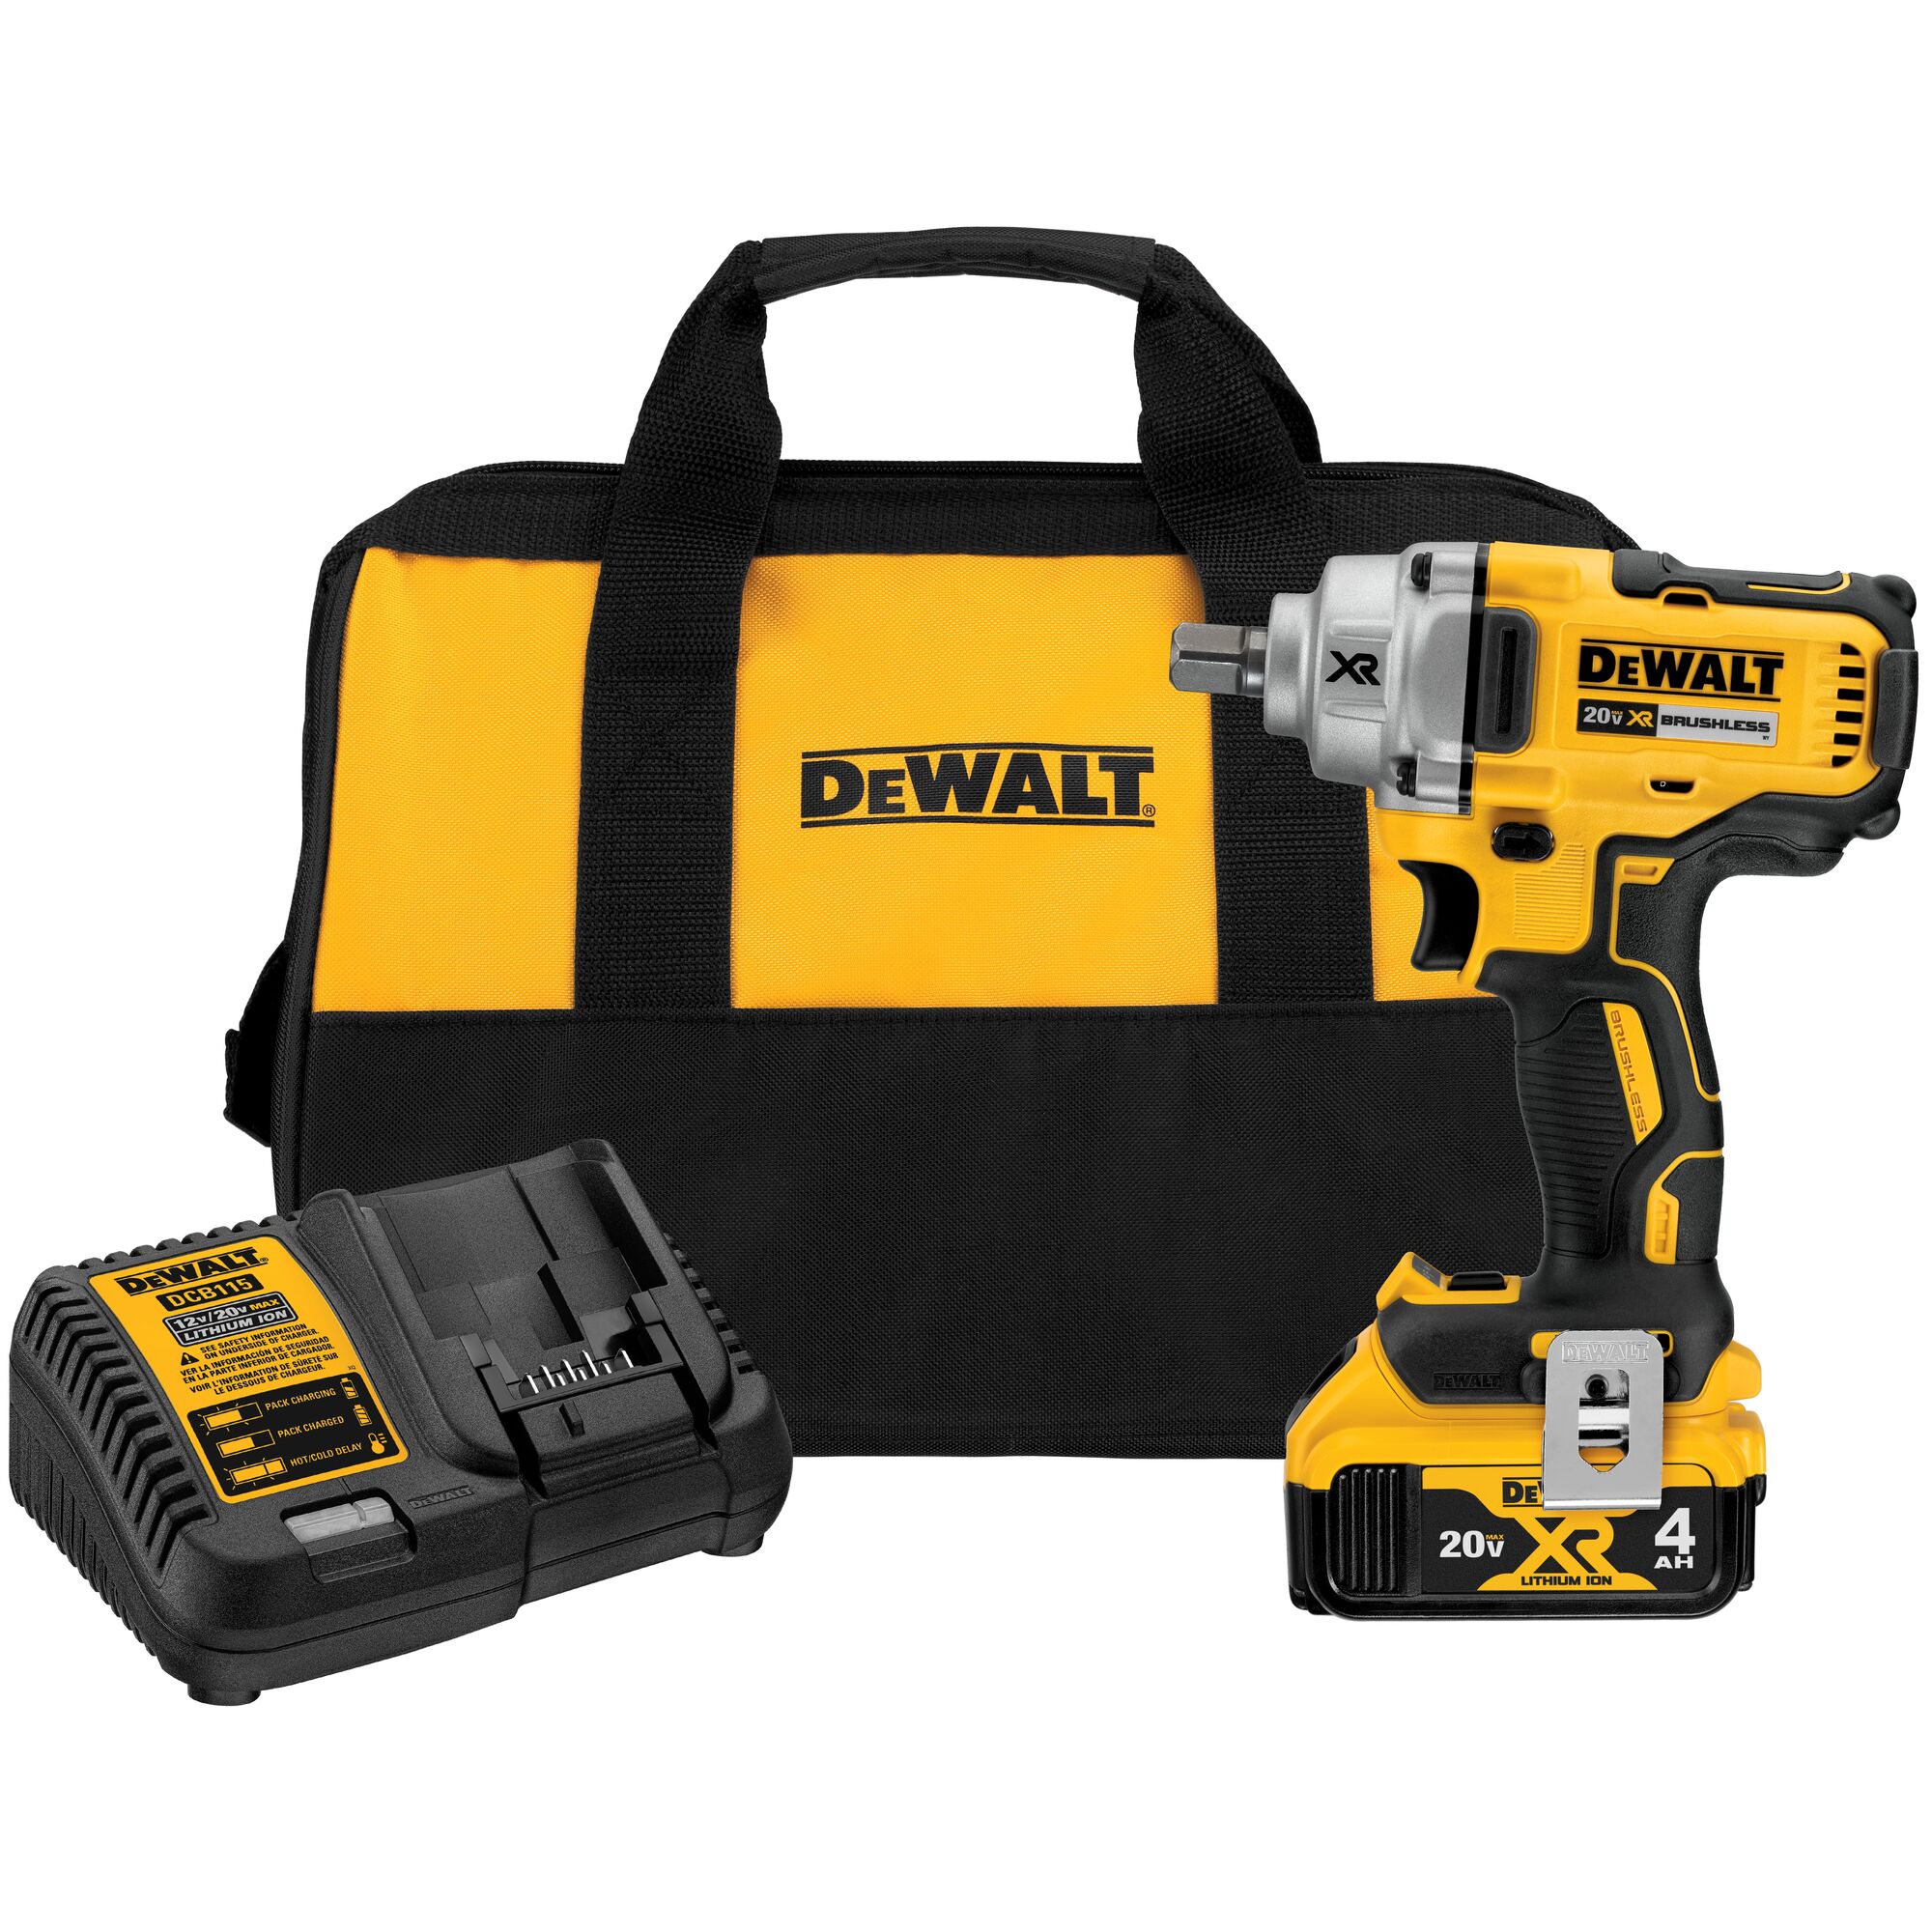 DEWALT Impact Wrench DCF894 18V Brushless Cordless Electric Wrench 1/2in  High Torque 447NM Rechargeable Car Disassembly Tools